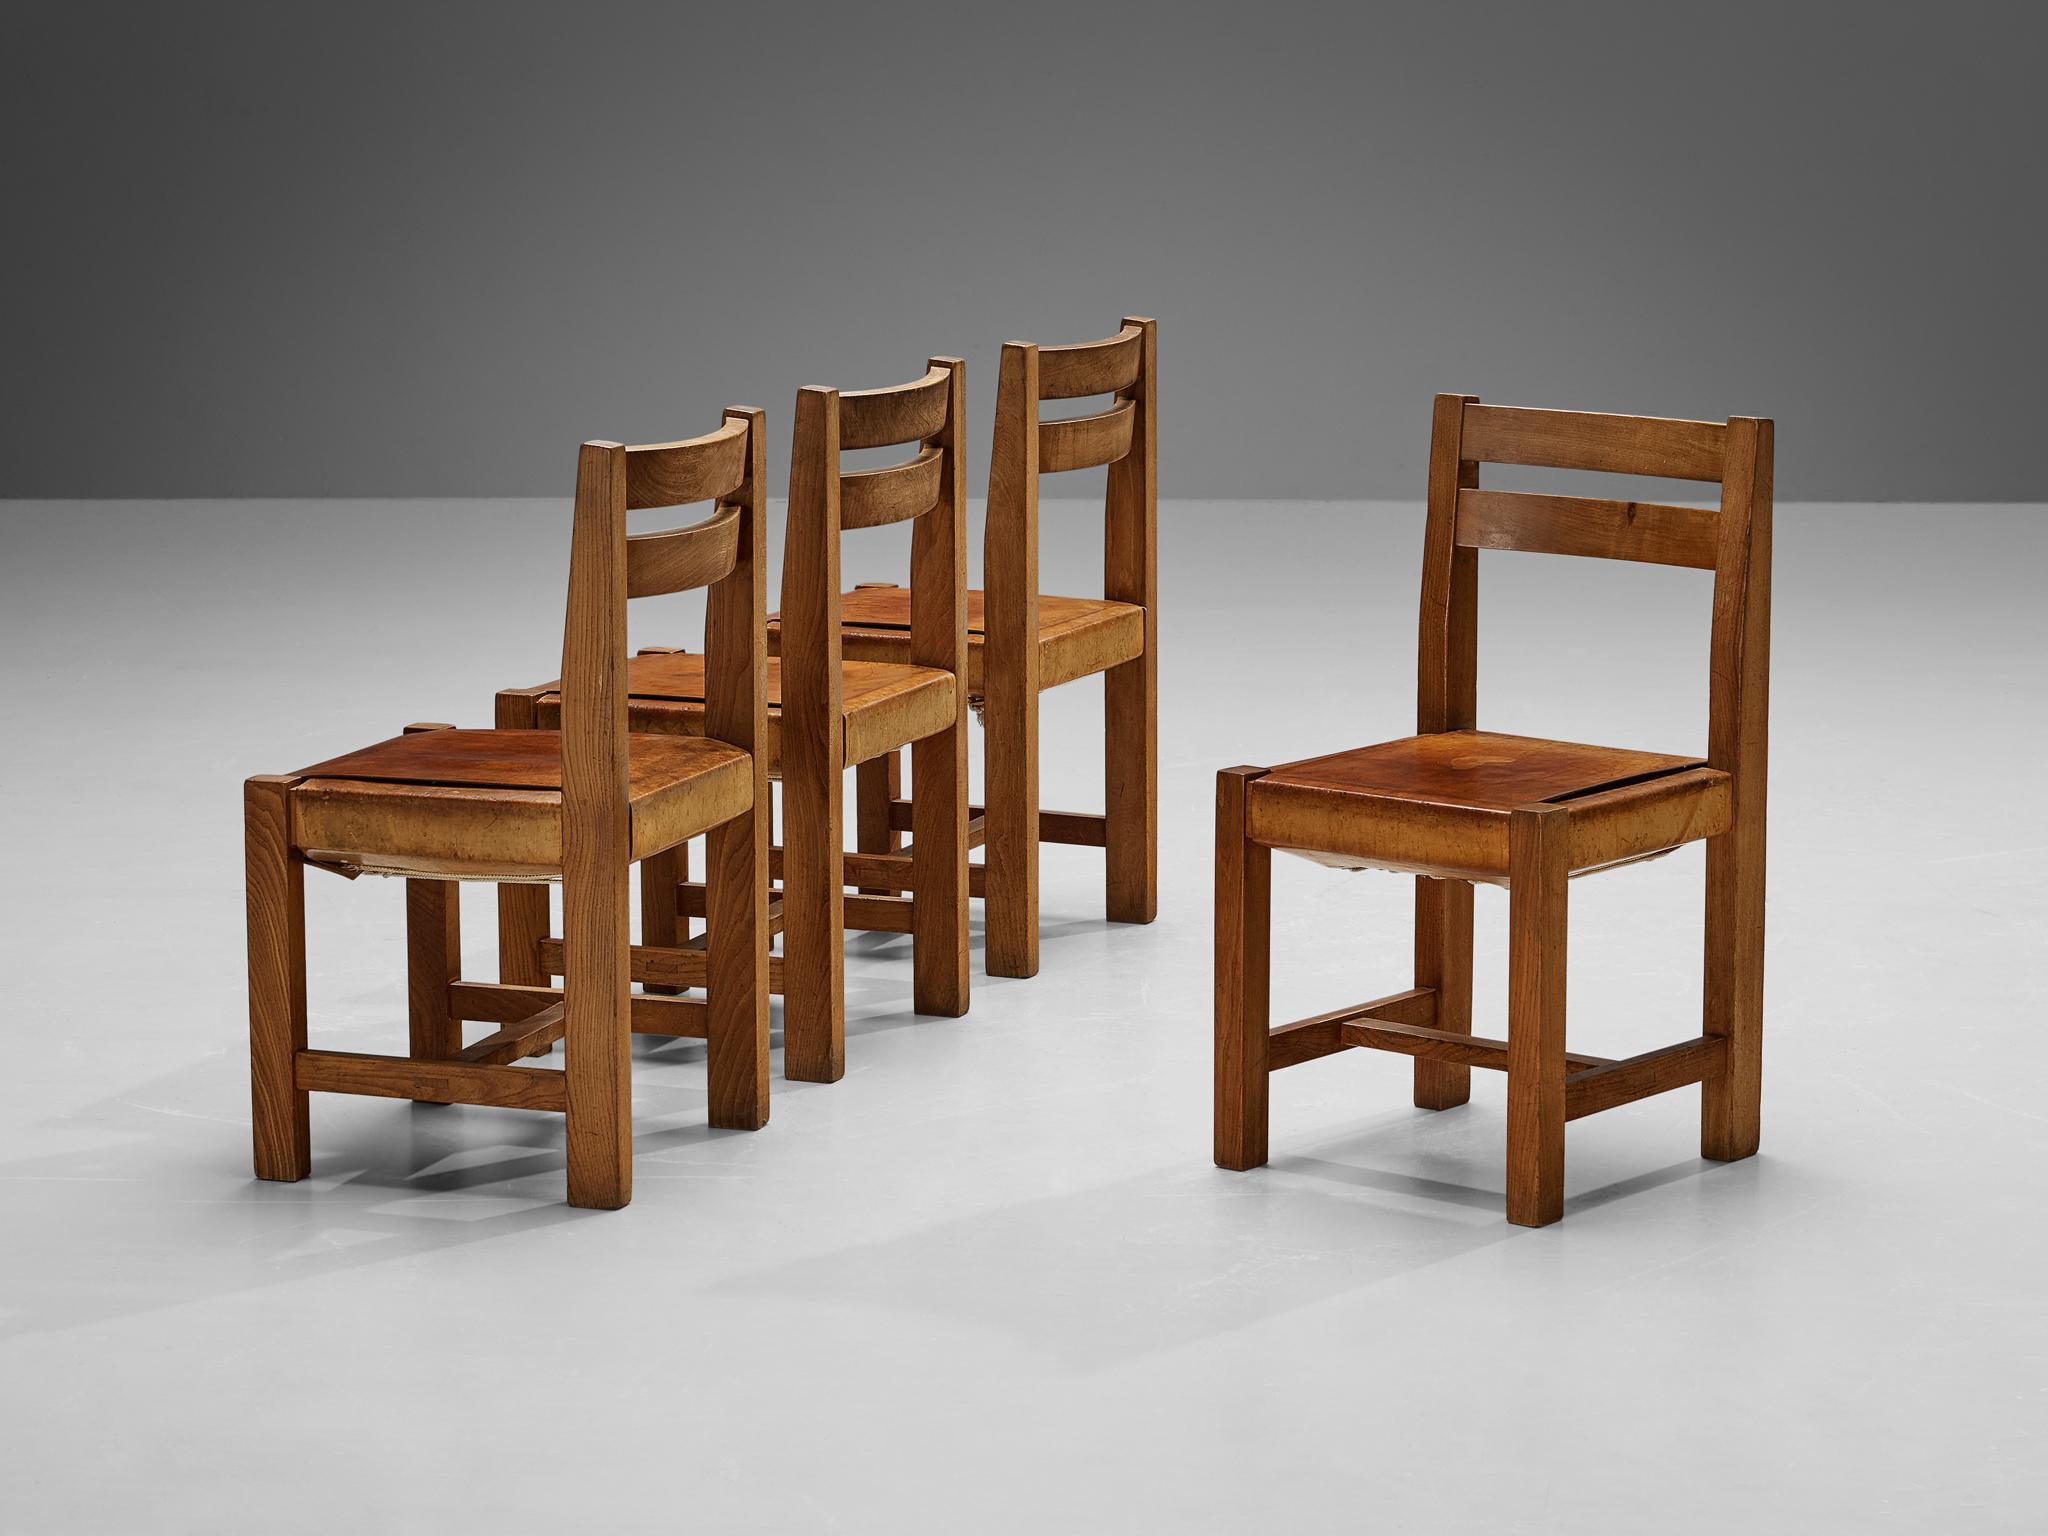 Atelier C. Demoyen, set of four dining chairs, elm, leather, rope, brass, France, 1970s

Atelier C. Demoyen (Claude de Moyen) gained prominence as a workshop recognized for crafting, among others, Pierre Chapo's designs. Consequently, their own